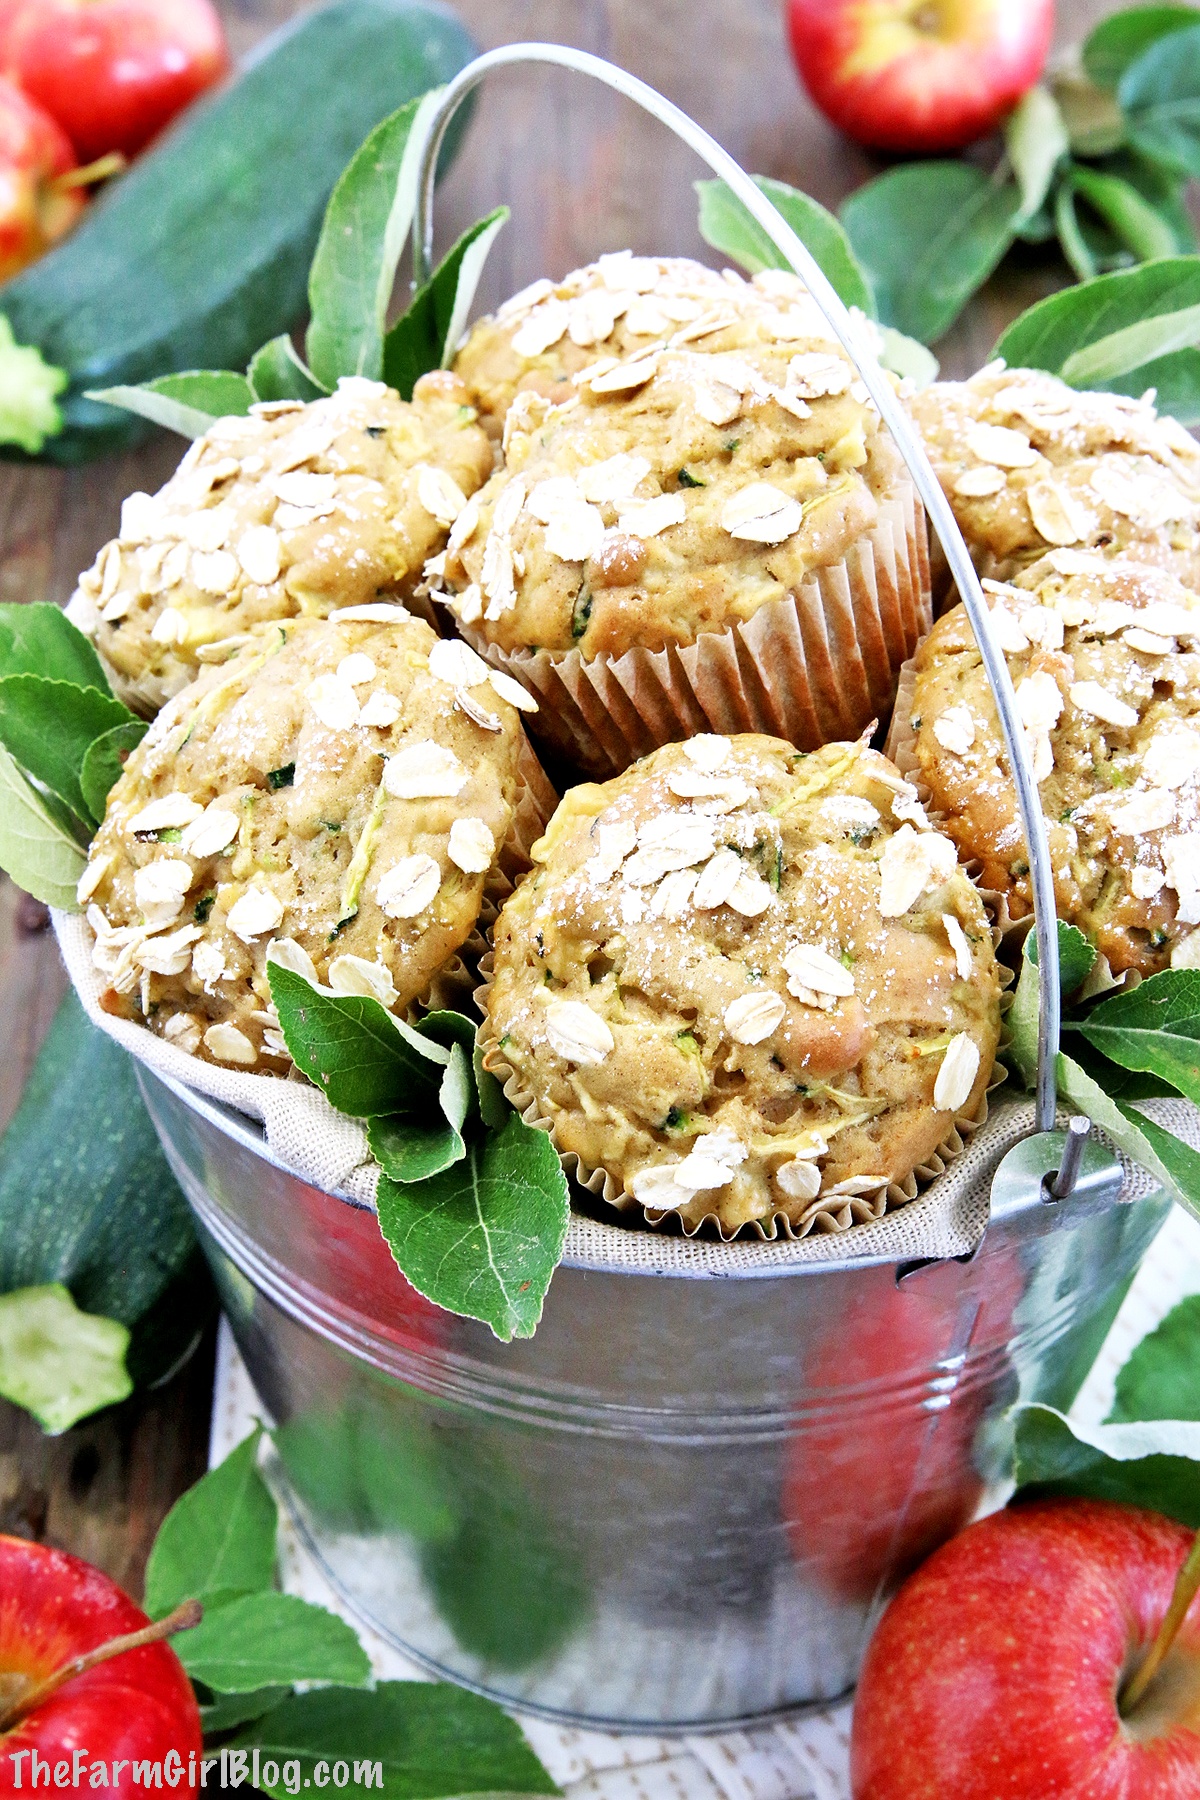 This Apple Zucchini Muffins Recipe is a must-make Fall treat! They are tender, fluffy, airy and loaded with homegrown zucchini and chunks of homegrown apples. I love this recipe because it has no added oil moistener in it, but are only moistened by apple sauce. This adds a rich and delicious taste as well as making them super moist. #applezucchinimuffins #cleaneating #homegrownproduce #thefarmgirlblog